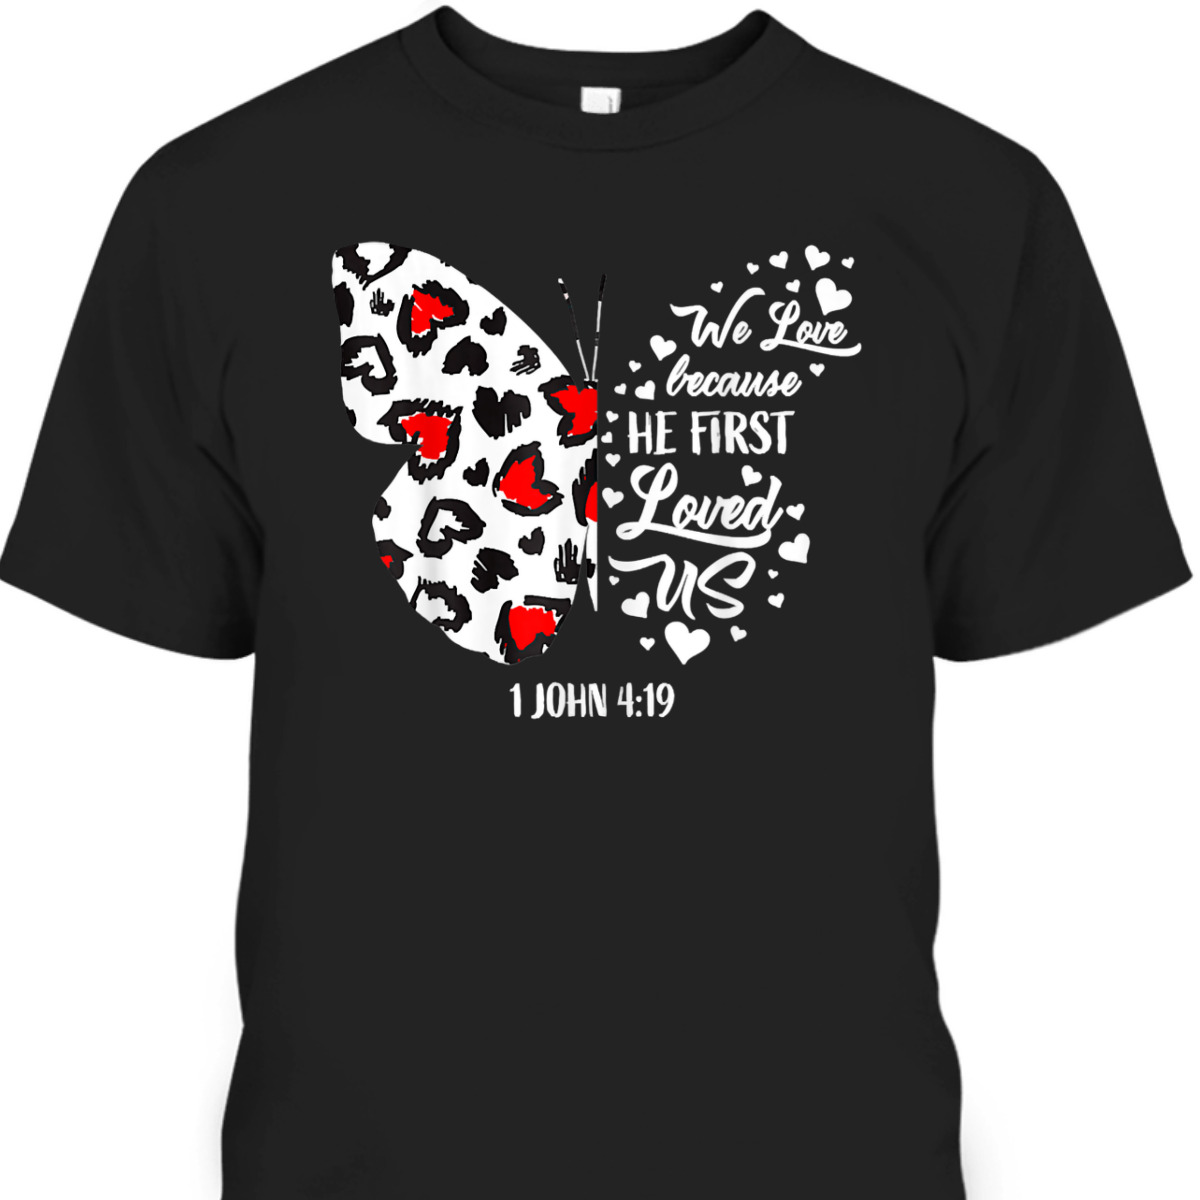 We Love Because He First Loved Us T-Shirt Christian Jesus Valentine Gift